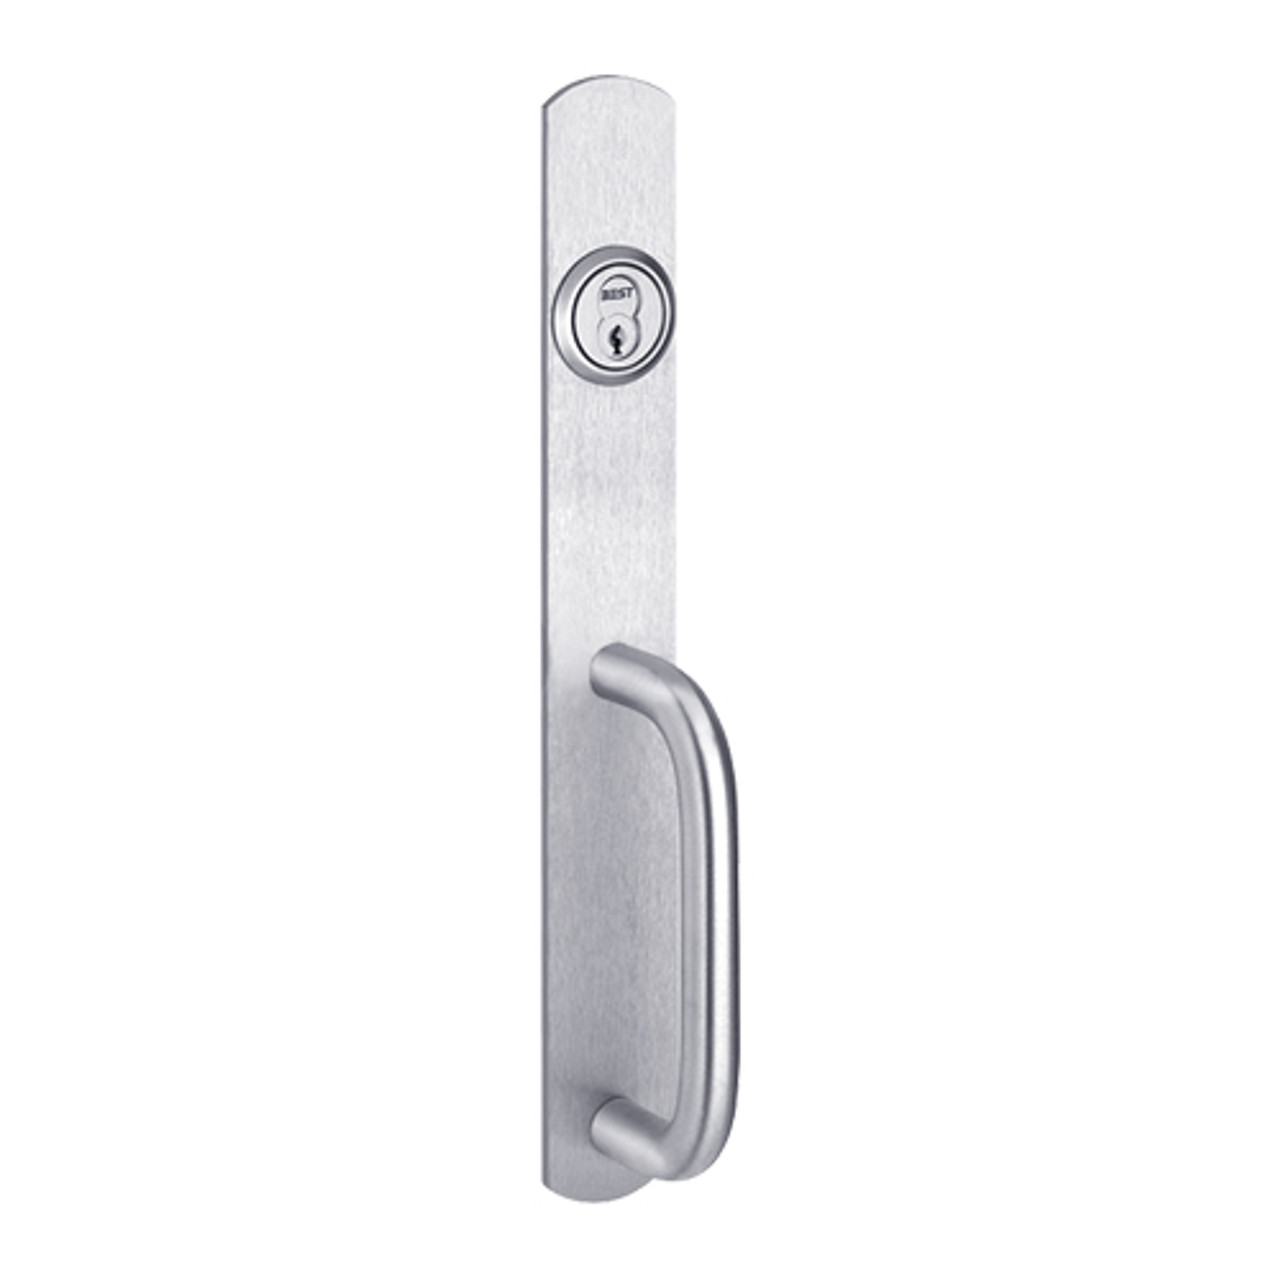 2005C-625 PHI Key Controls Thumb Piece Trim with C Design Pull for Apex Narrow Stile Device in Bright Chrome Finish